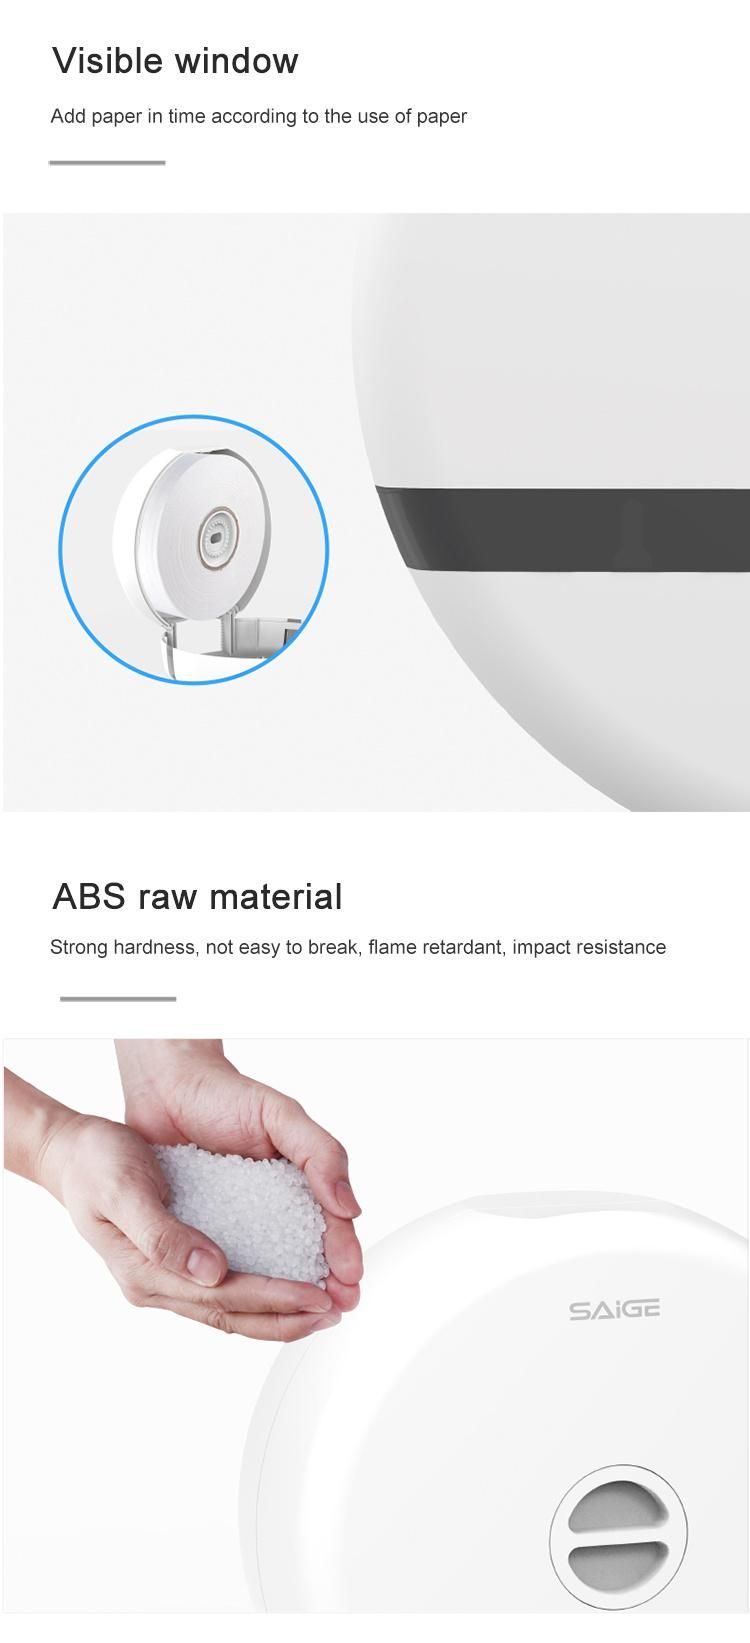 Saige Wall Mounted High Quality ABS Plastic Jumbo Toilet Roll Paper Dispenser